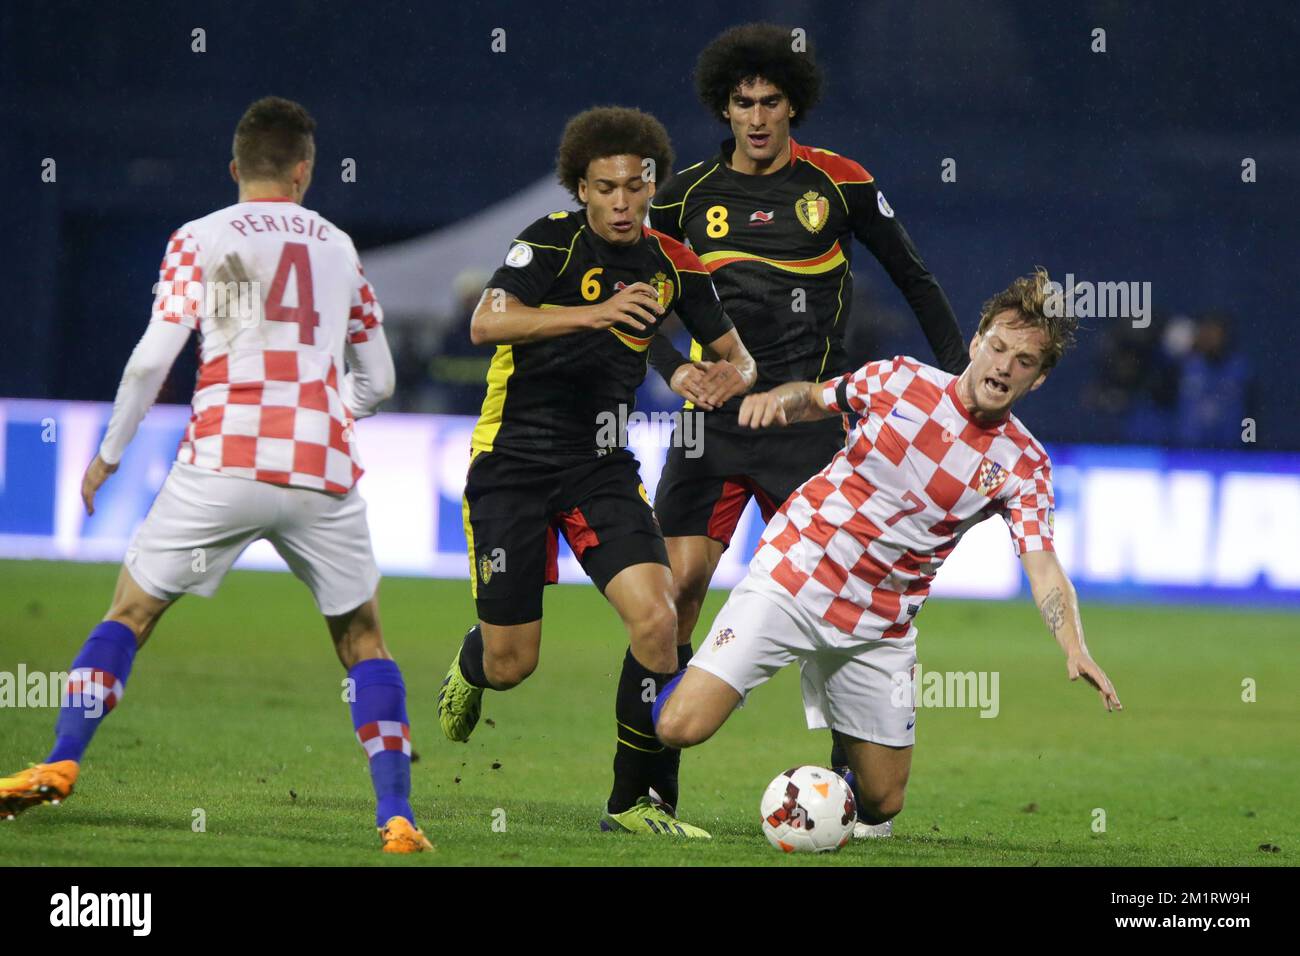 20131011 - ZAGREB, CROATIA: Croatia's Ivan Perisic, Belgium's Axel Witsel, Belgium's Marouane Fellaini and Croatia's Ivan Rakitic fight for the ball during a soccer game between Belgian national team The Red Devils and the Croatian national team in the Maksimir stadium in Zagreb, Croatia, Friday 11 October 2013, a qualification game for the 2014 FIFA World Cup. The Red Devils won the match and qualified for the 2014 FIFA World Cup in Brazil. BELGA PHOTO PRIMOZ LAVRE Stock Photo